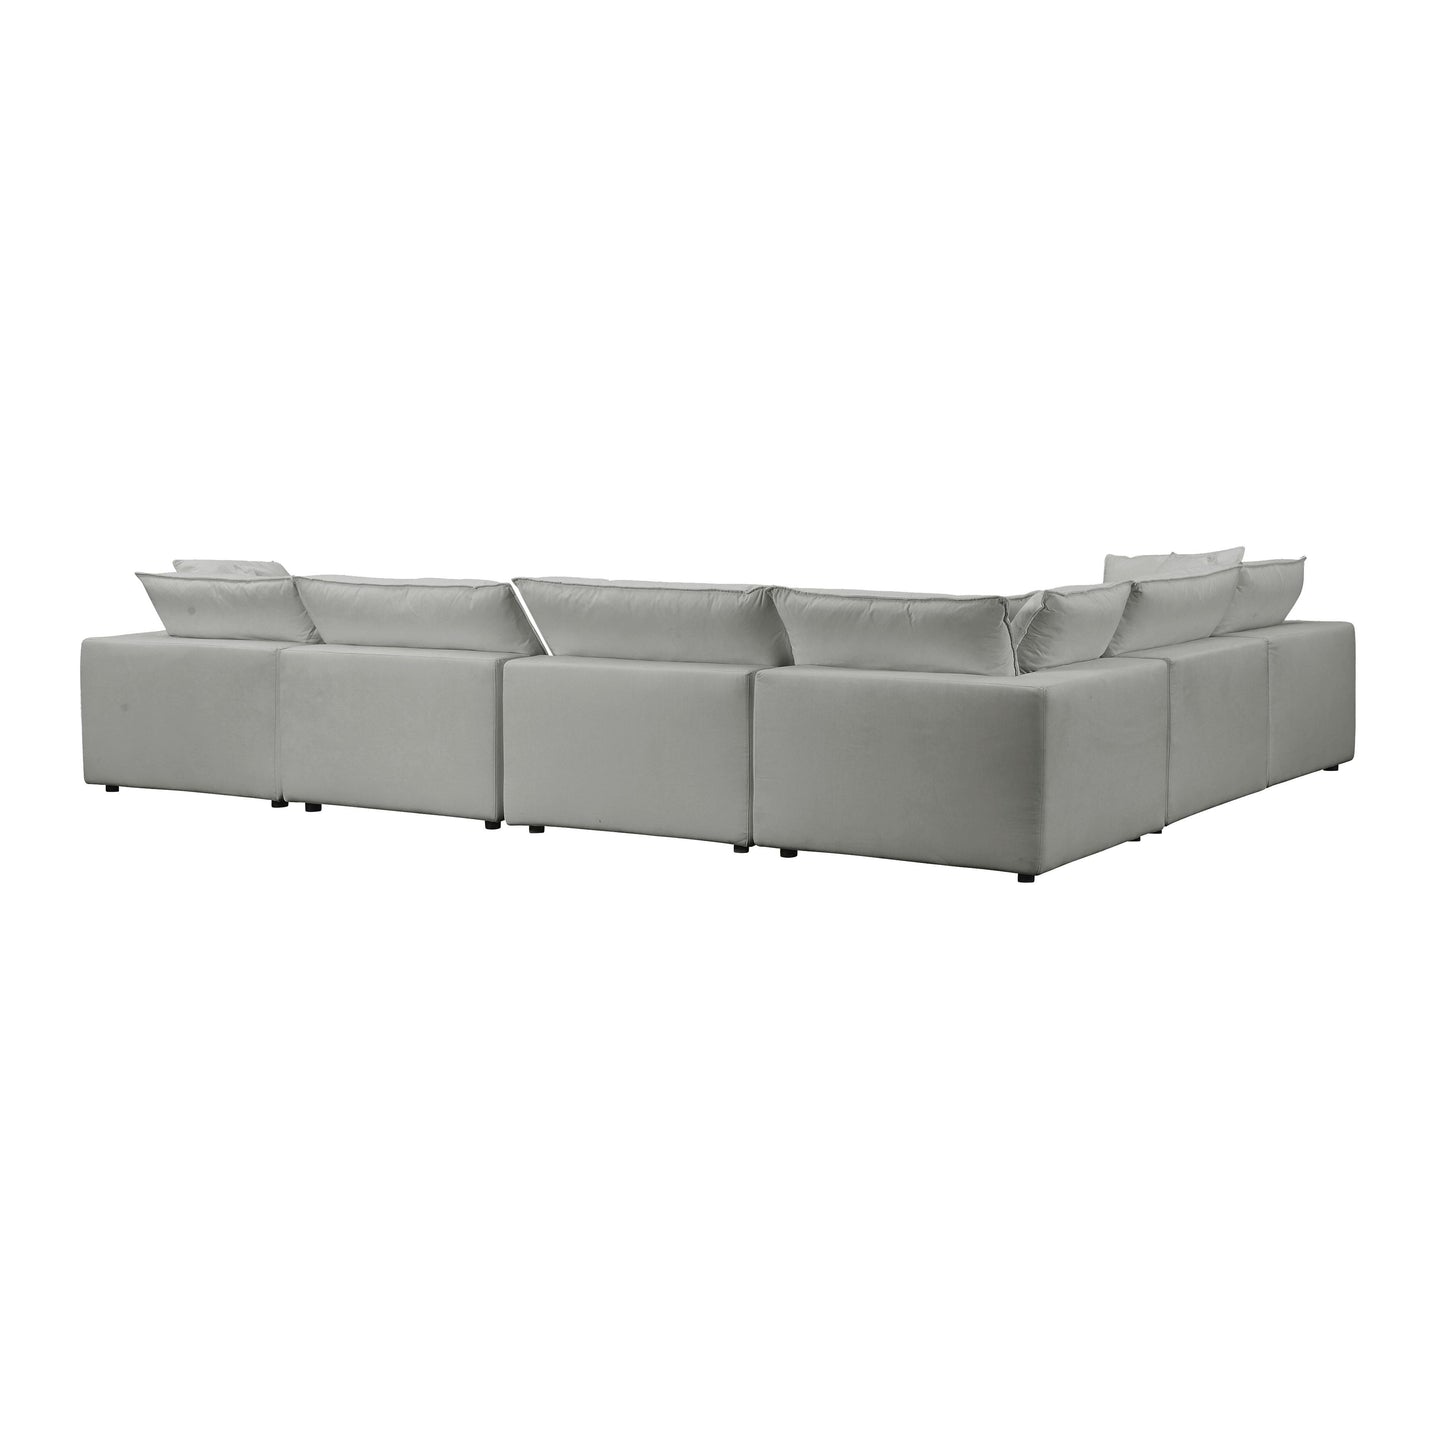 Cali Slate Modular Large Chaise Sectional by TOV